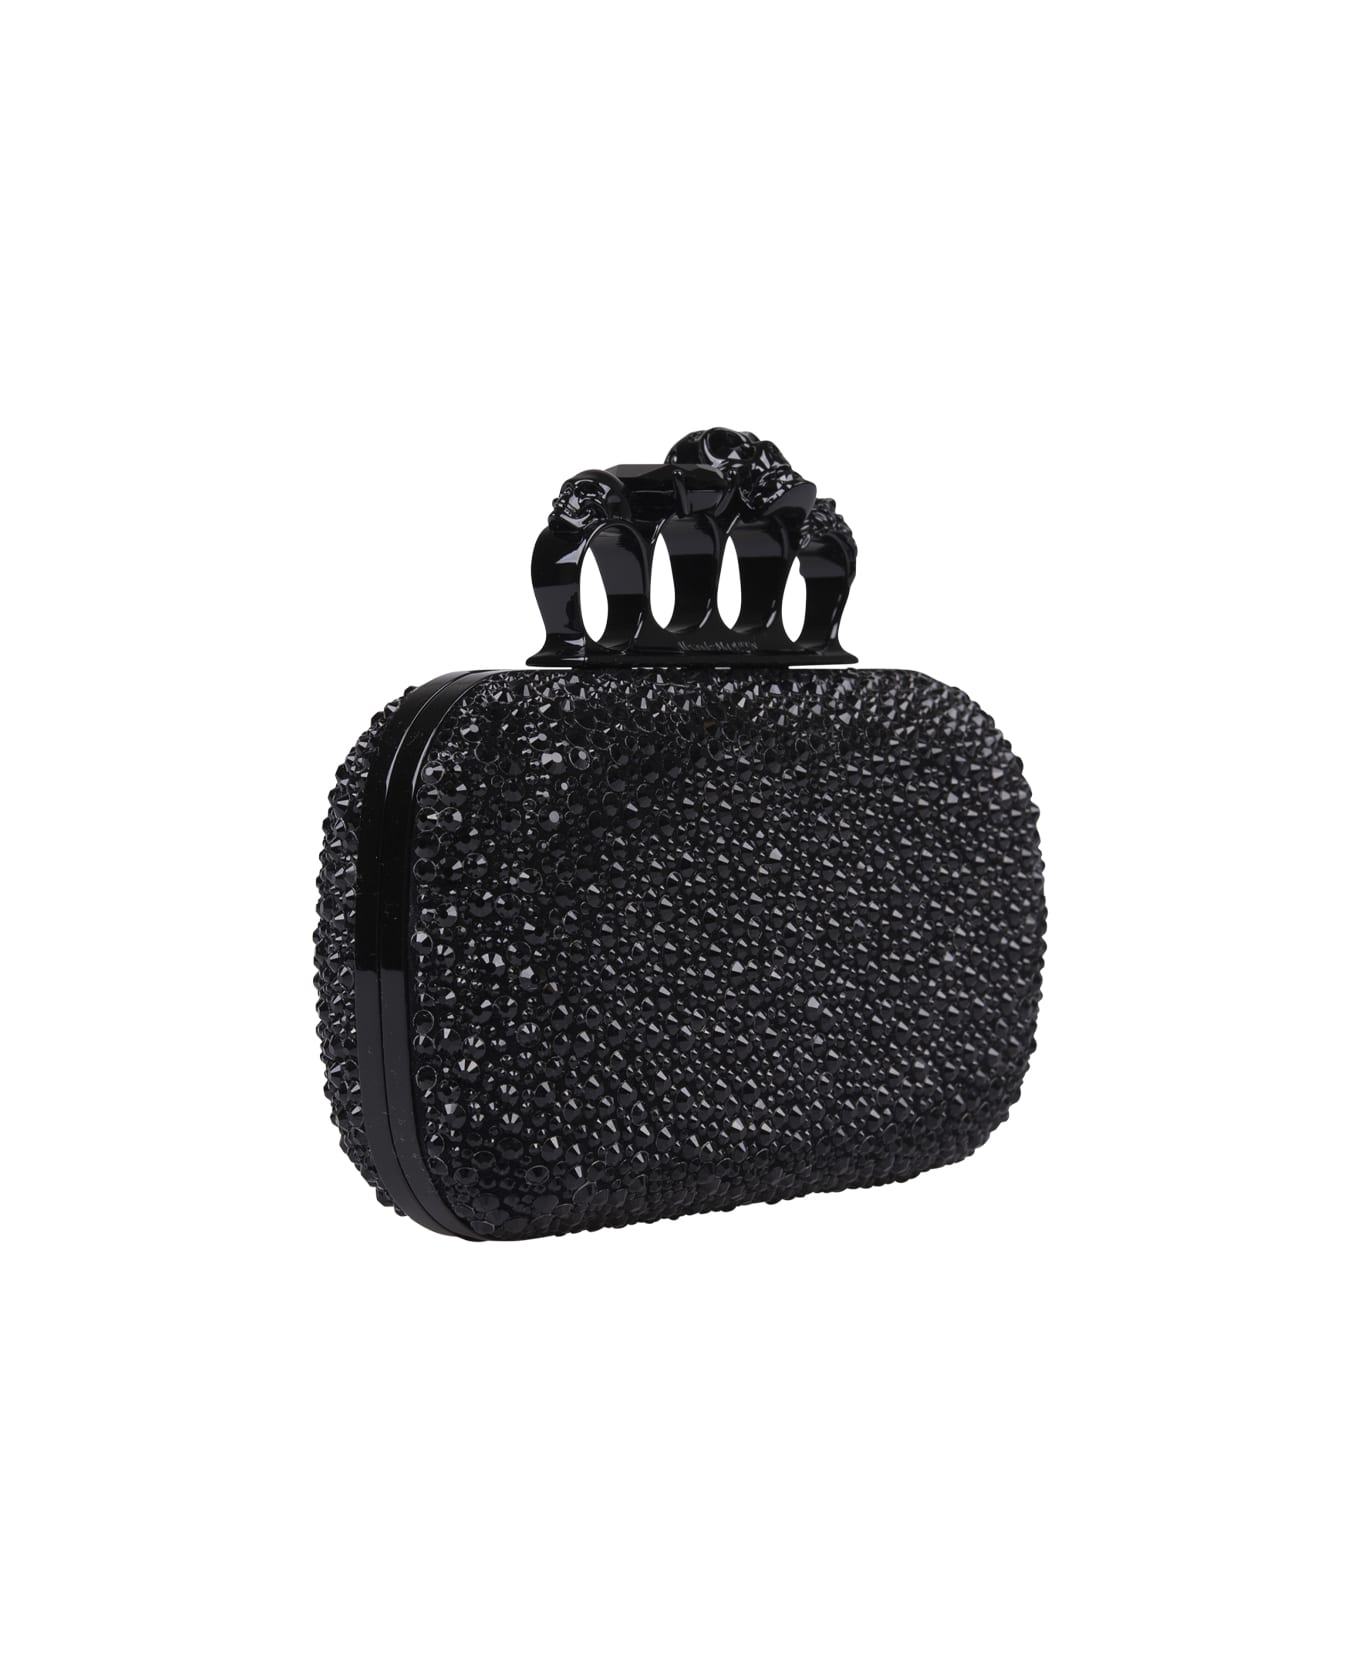 Alexander McQueen Black Skull Four Ring Clutch Bag With Chain - Nero